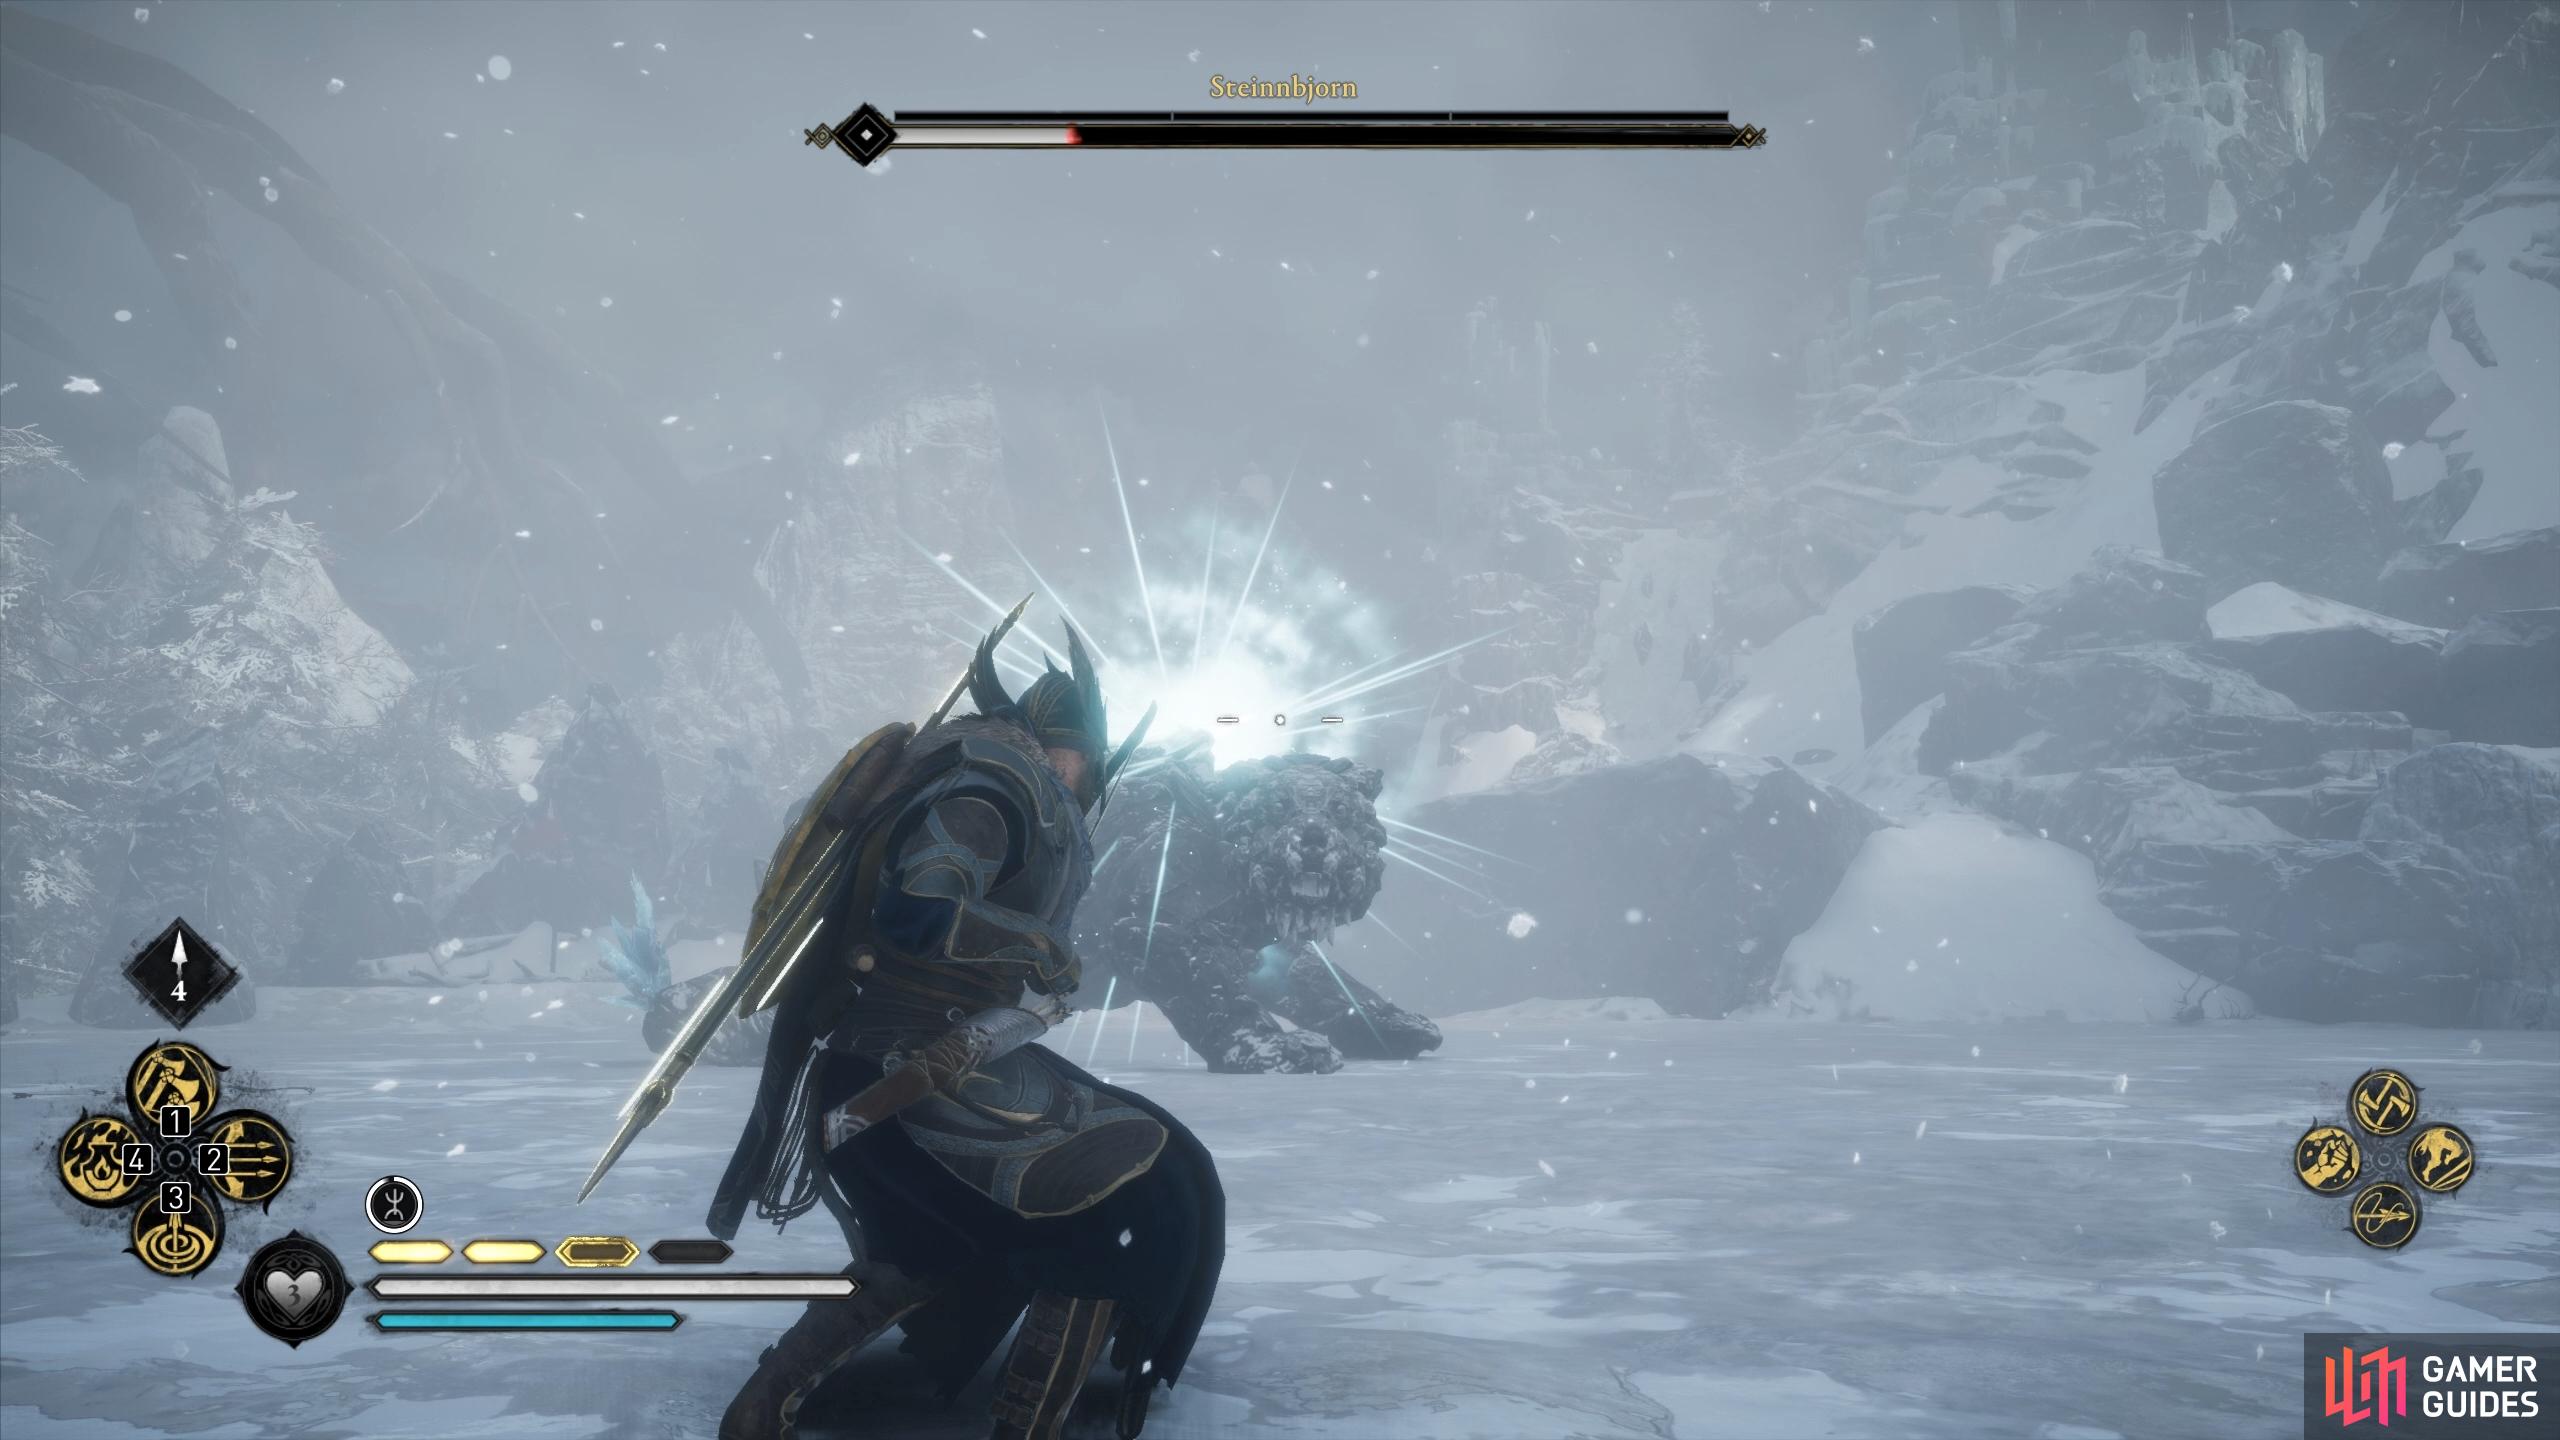 Shoot the ice from Steinnbjorns body to stun the bear for a brief moment.